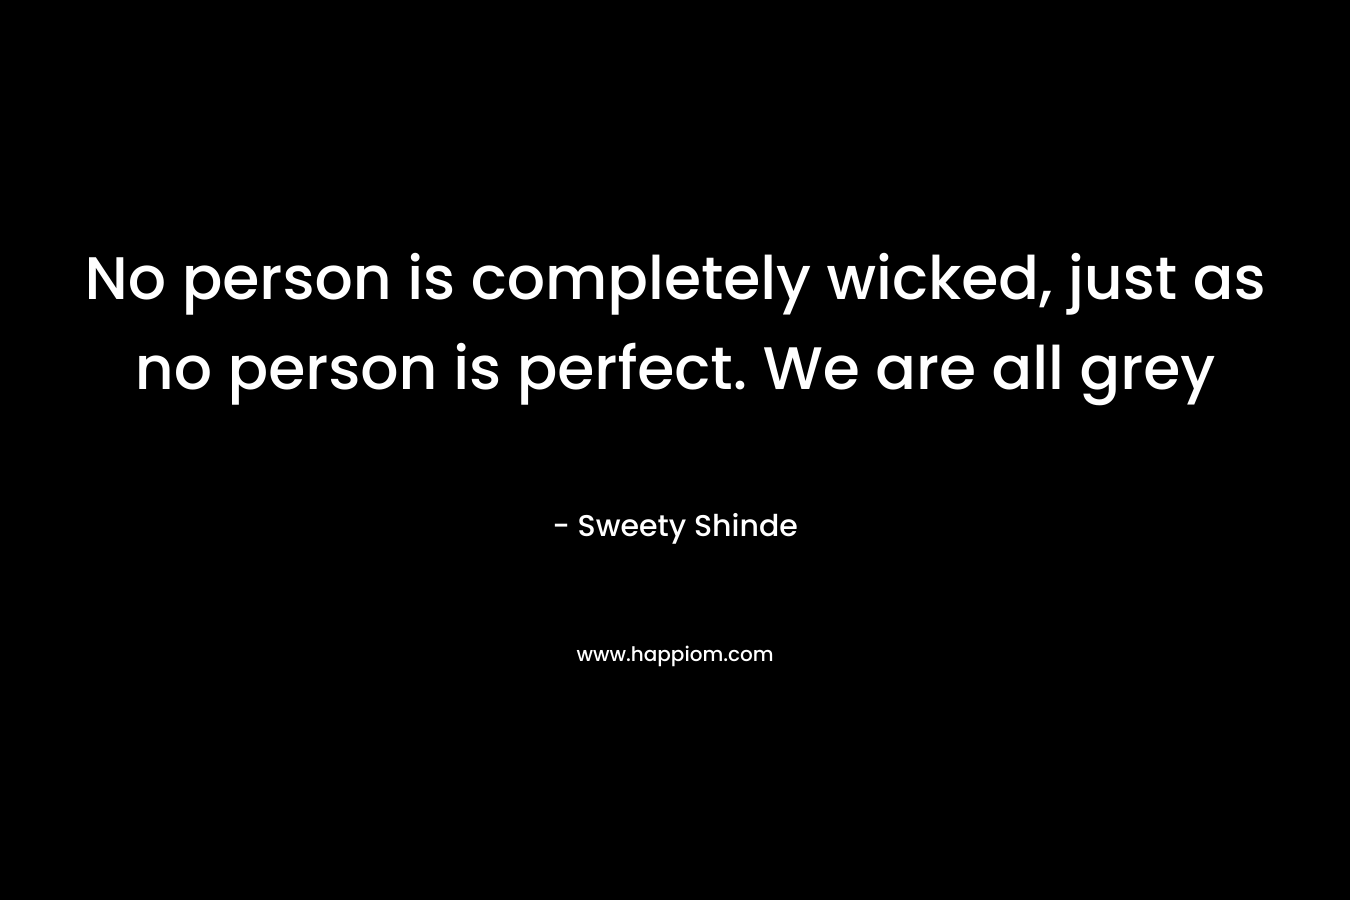 No person is completely wicked, just as no person is perfect. We are all grey